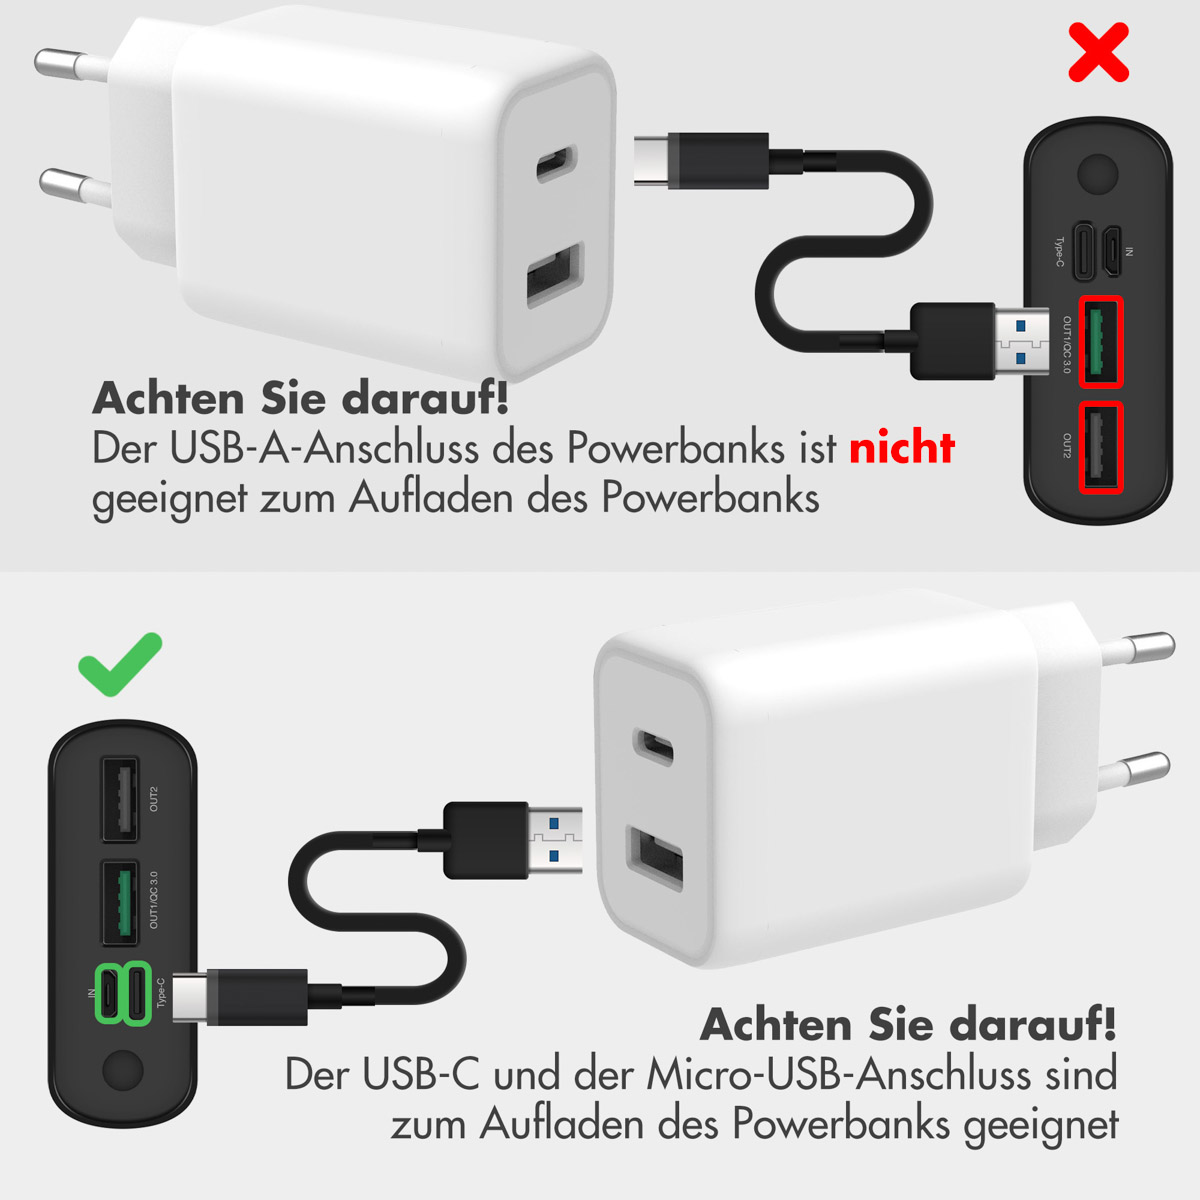 IMOSHION Power Delivery & Quick 10000 Schwarz Charge Powerbank mAh